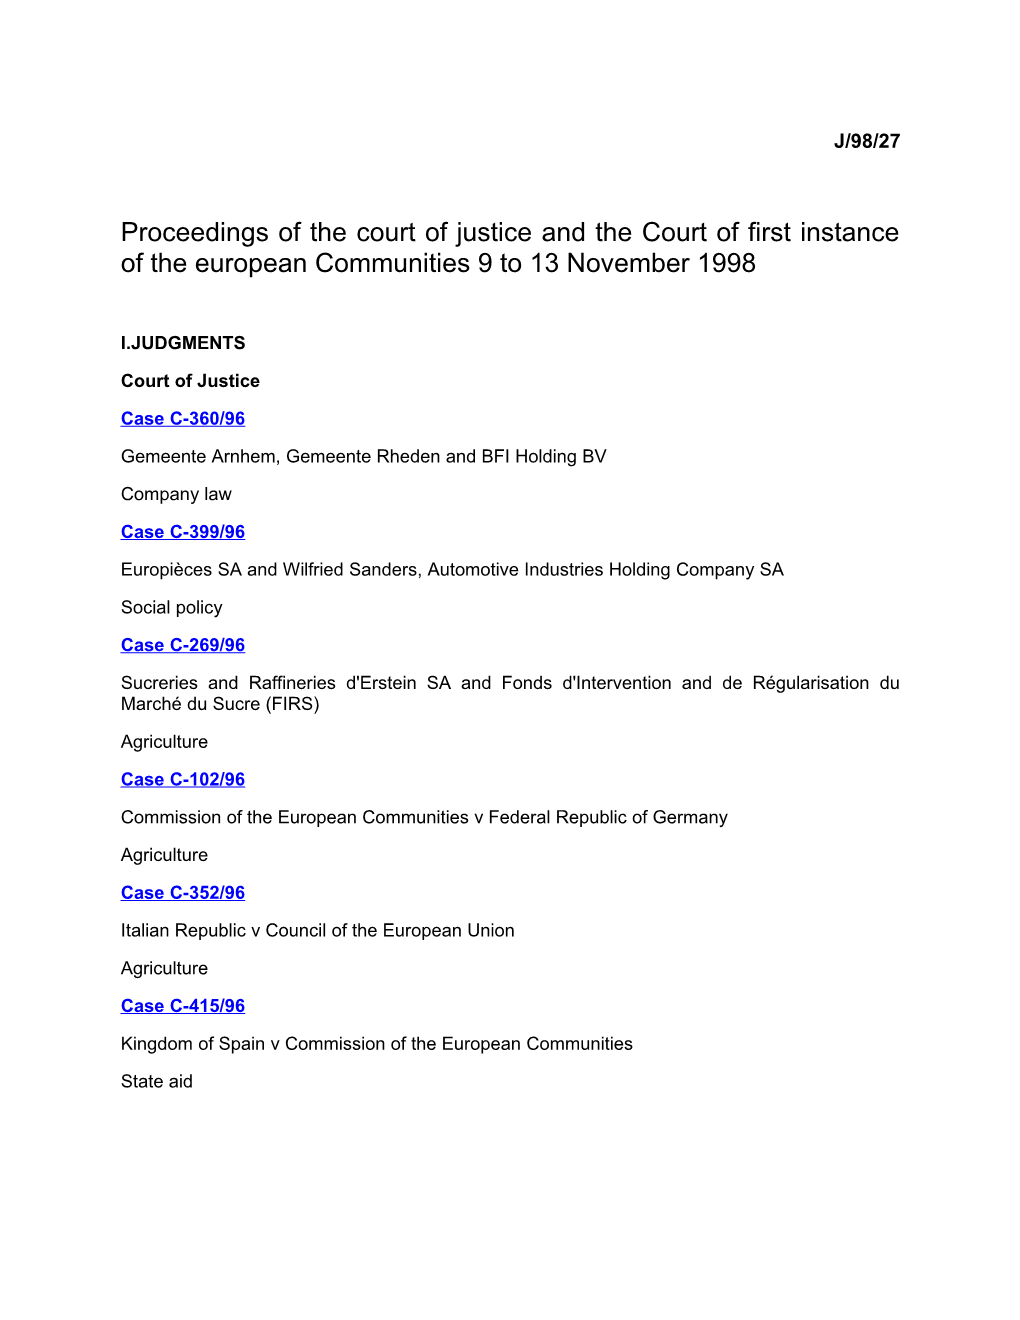 Proceedings of the Court of Justice and the Court of First Instance of the European Communities